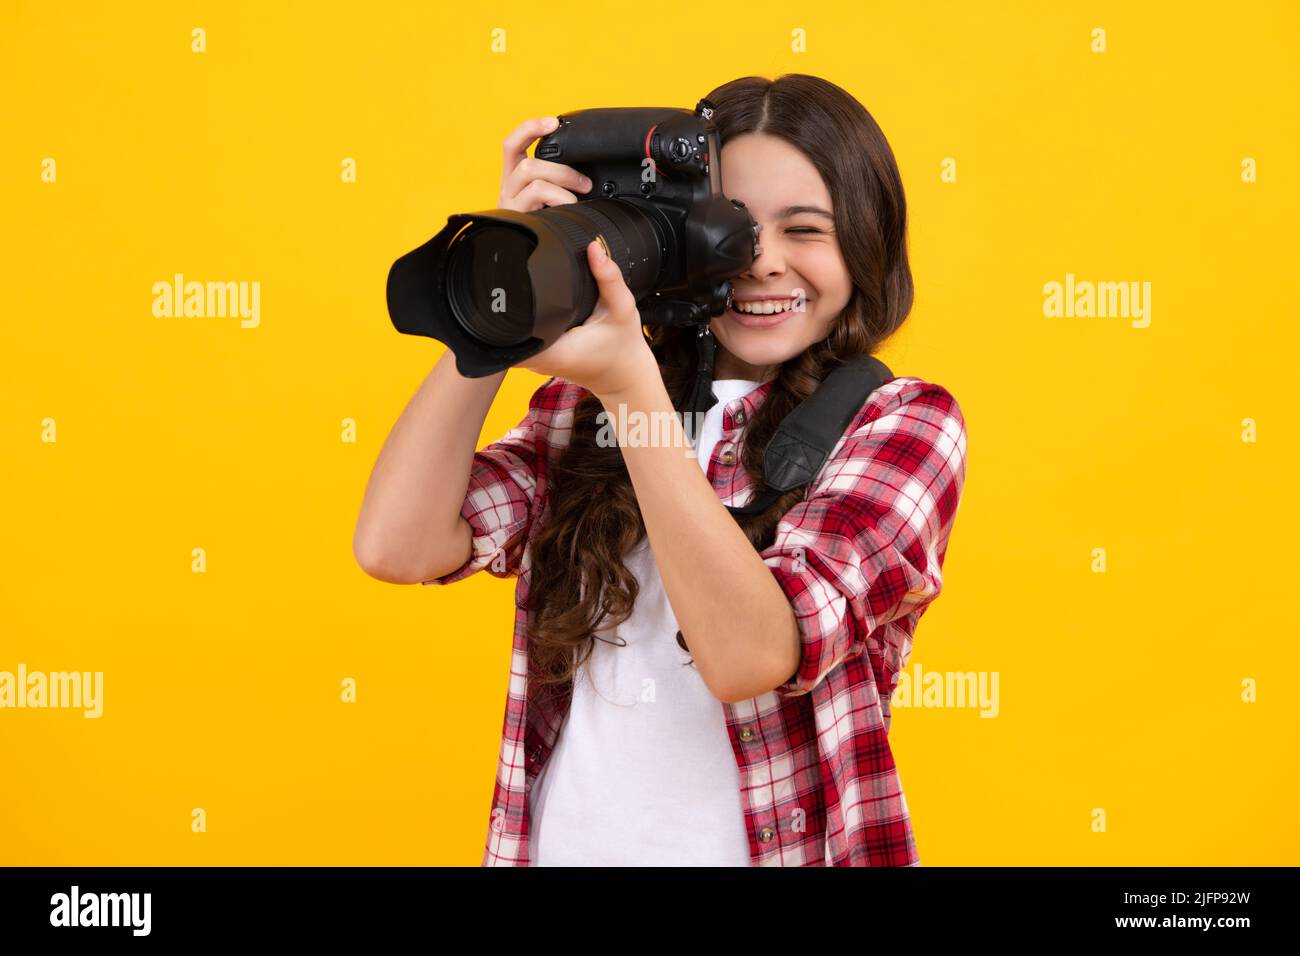 12, 13, 14 year old teen girl holding digital camera or DSLR over yellow background. Happy teenager, positive and smiling emotions of teen girl. Stock Photo